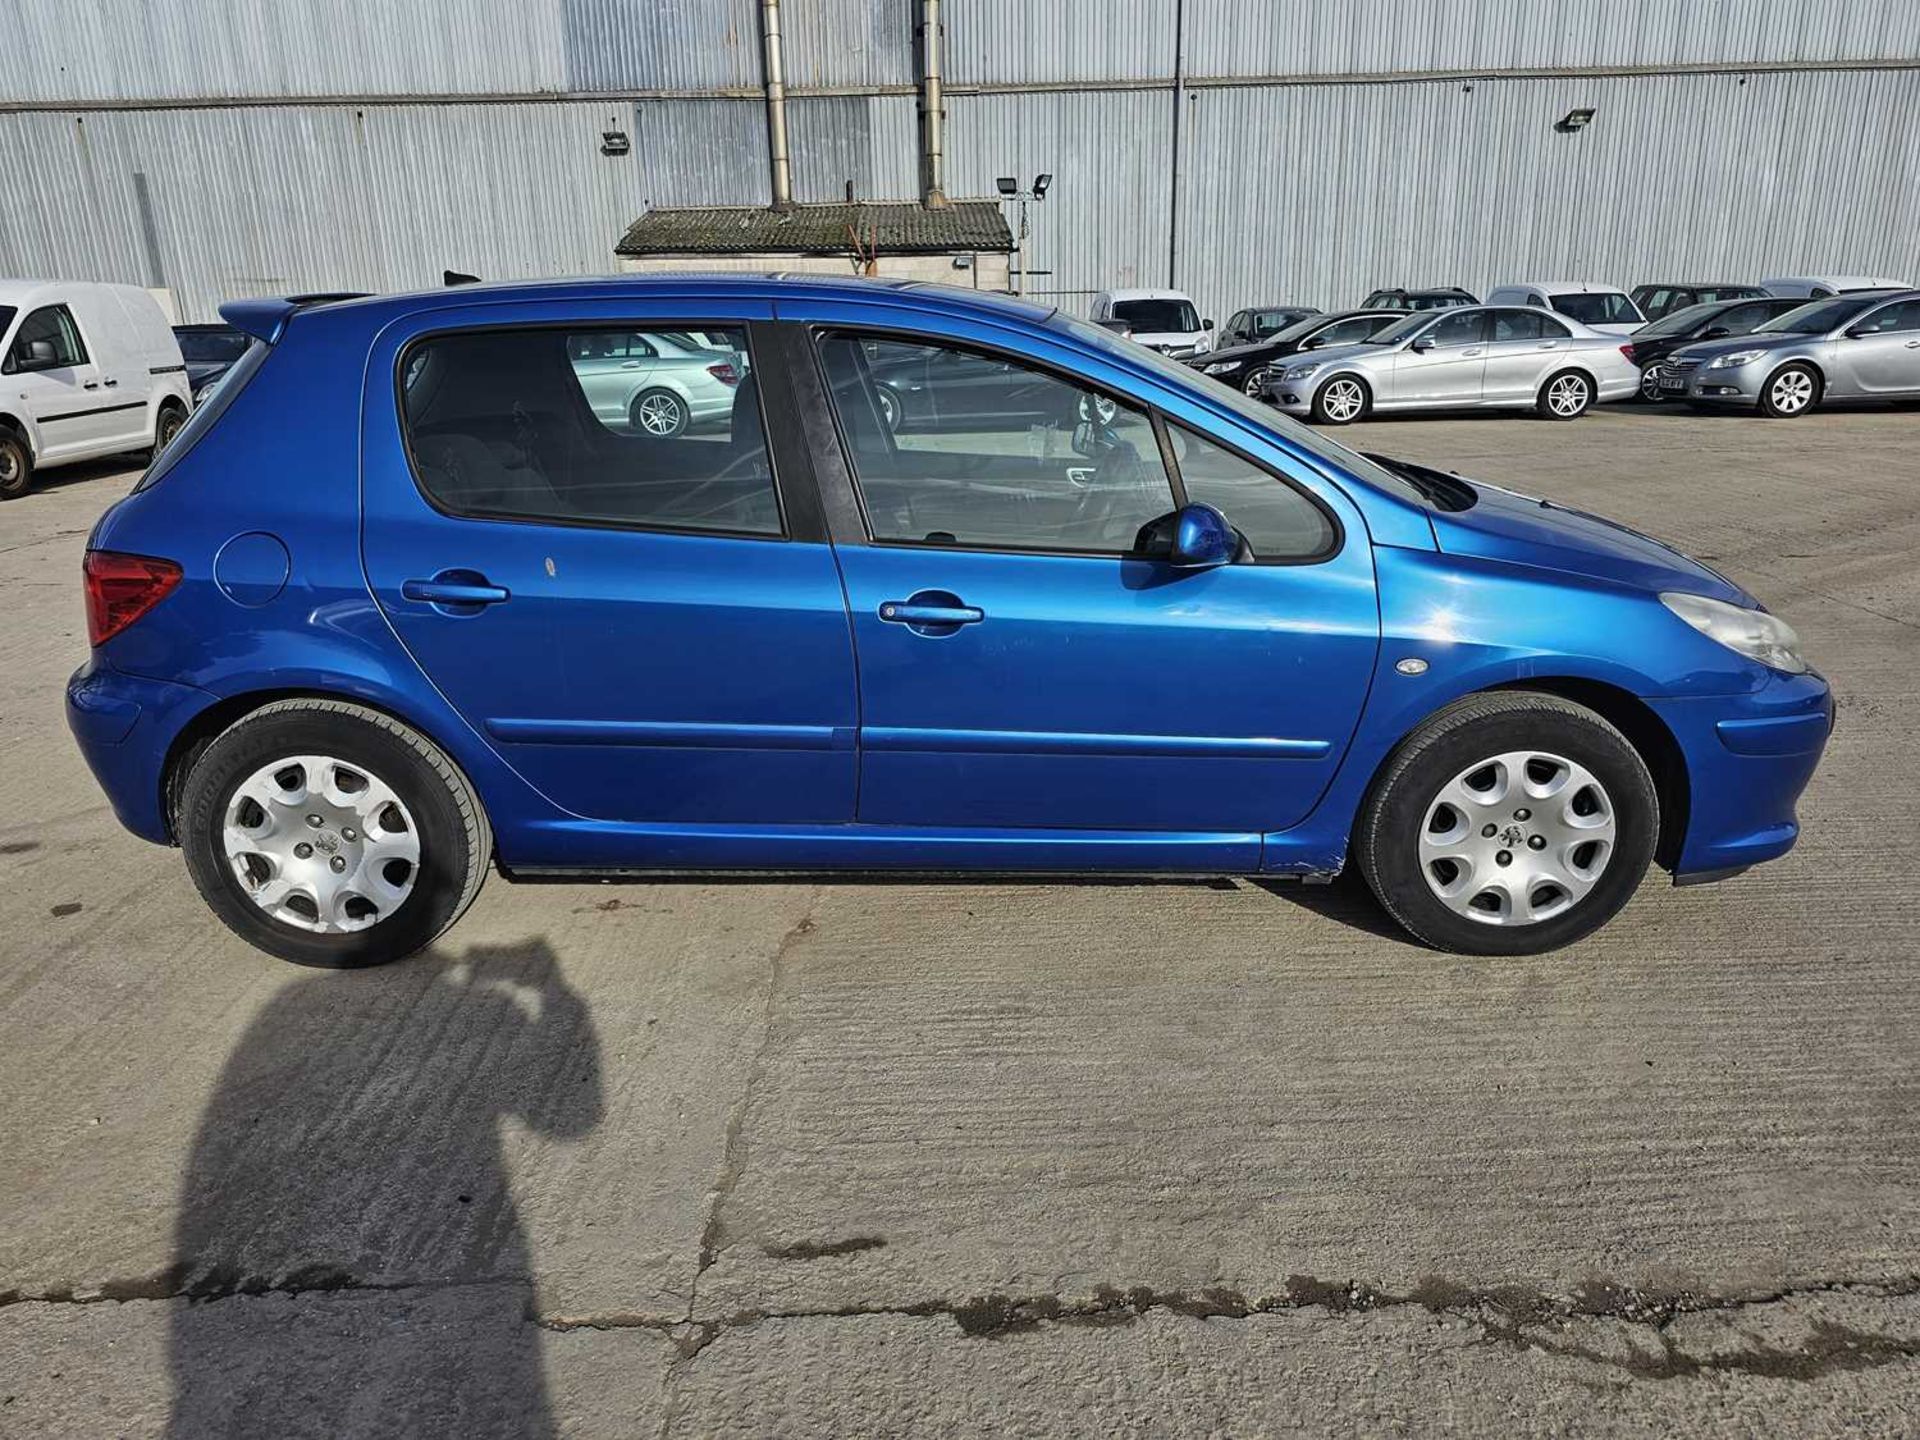 2007 Peugeot 307 X-line, 5 Speed, A/C (Reg. Docs. & Service History Available, Tested 07/24) - Image 36 of 56